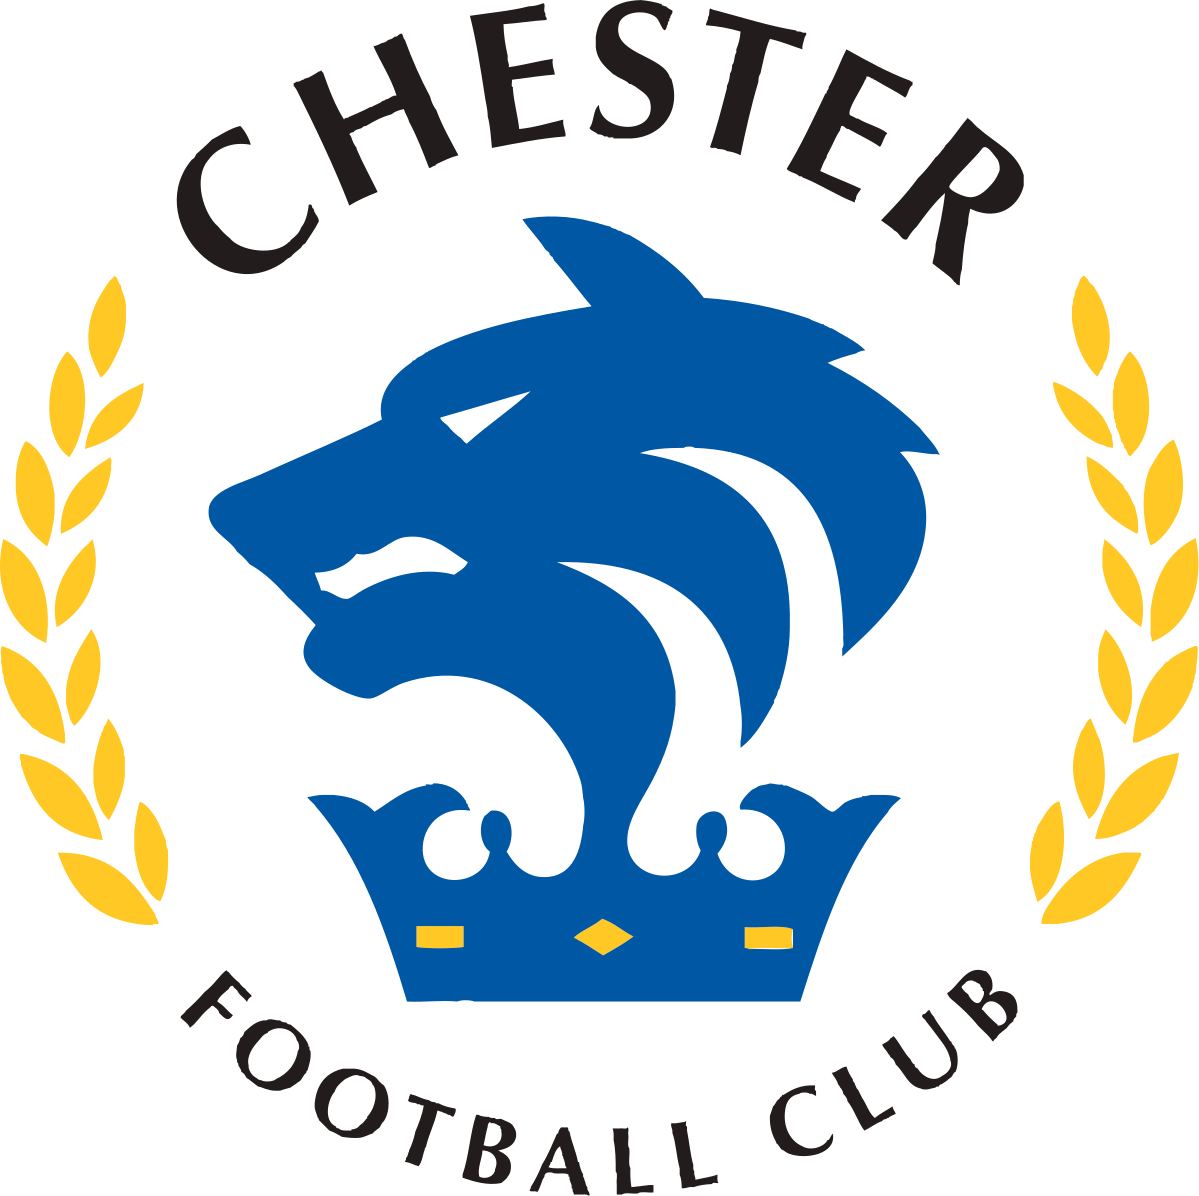 Chester FC